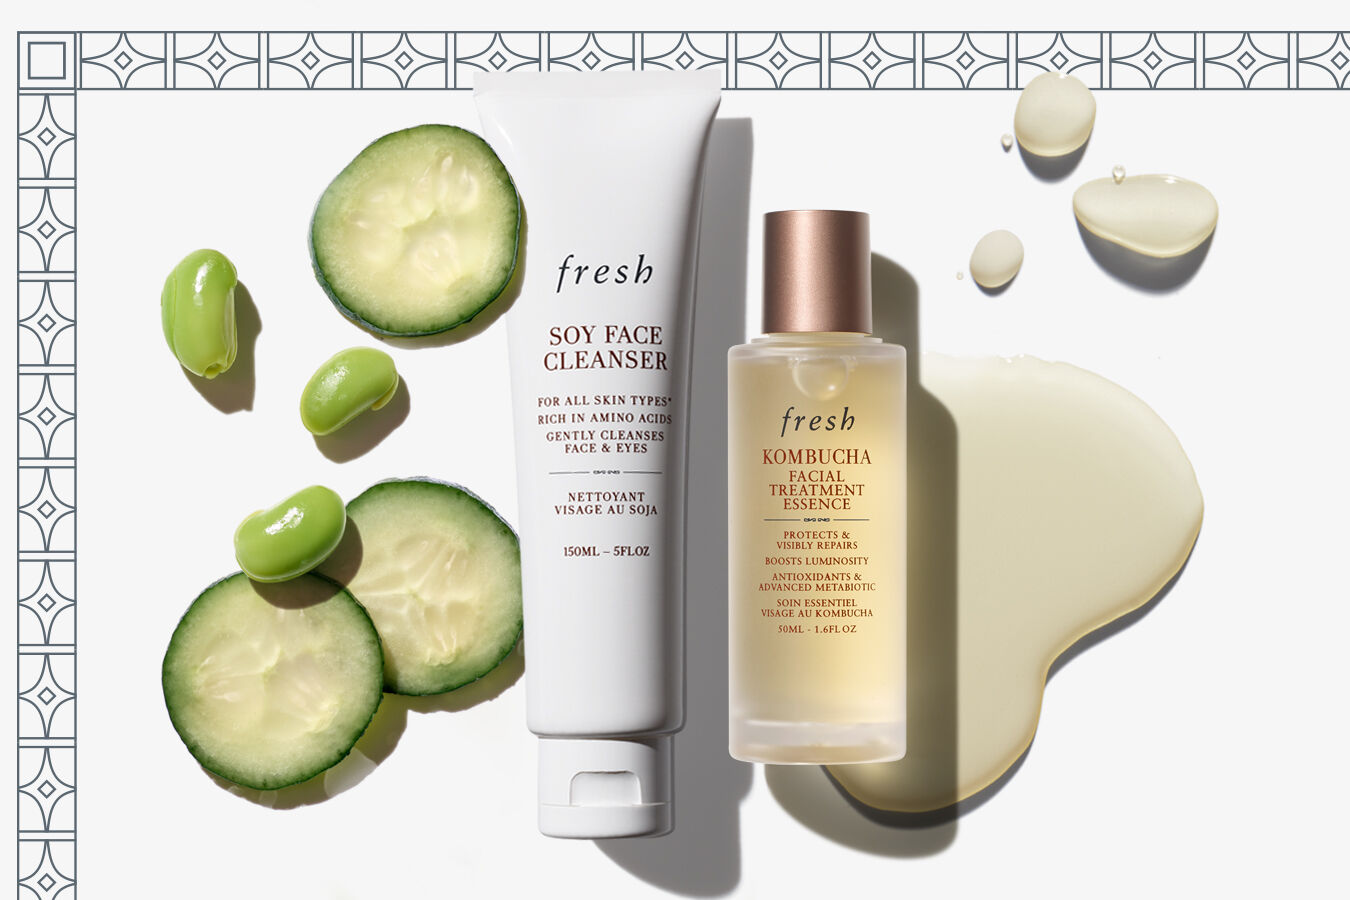 Fresh Cleanse & Hydrate Skincare Gift Set ($86 Value)